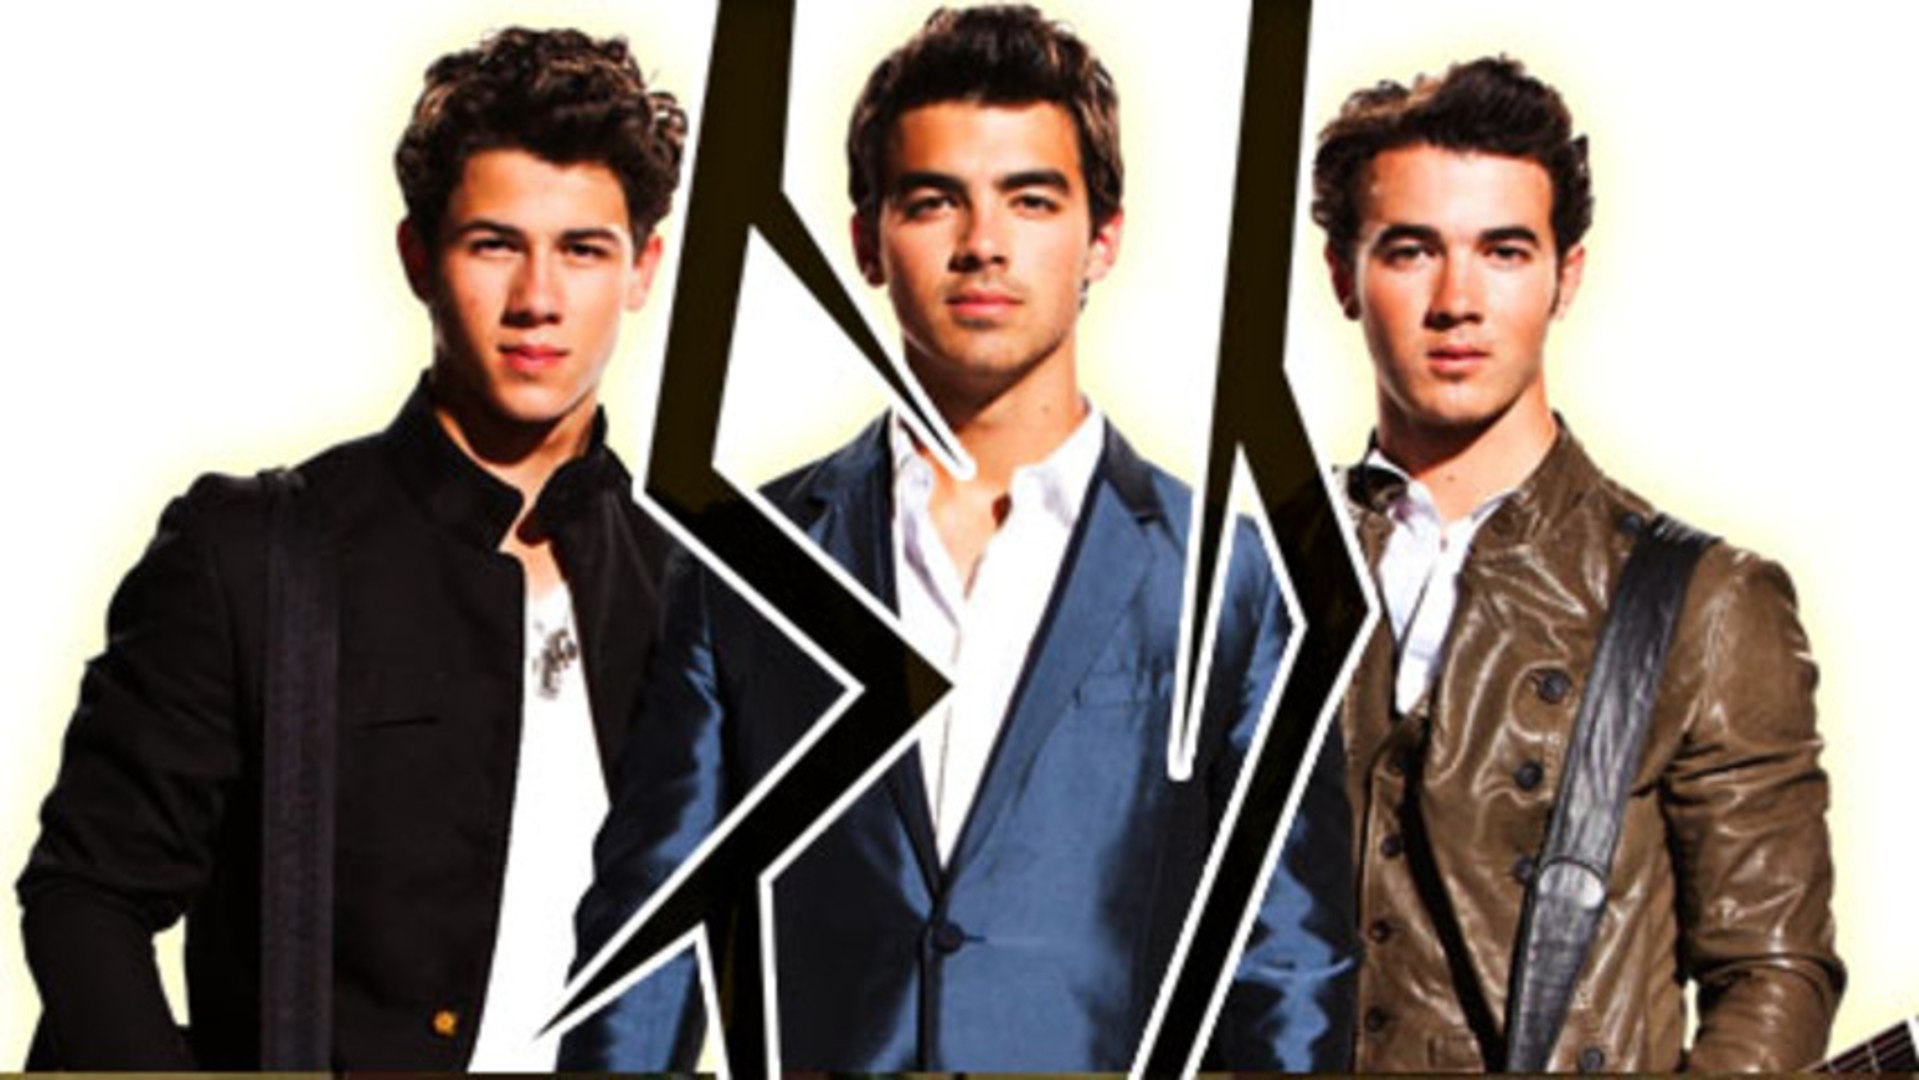 Jonas Brothers Split Officially - See Them Through The Years